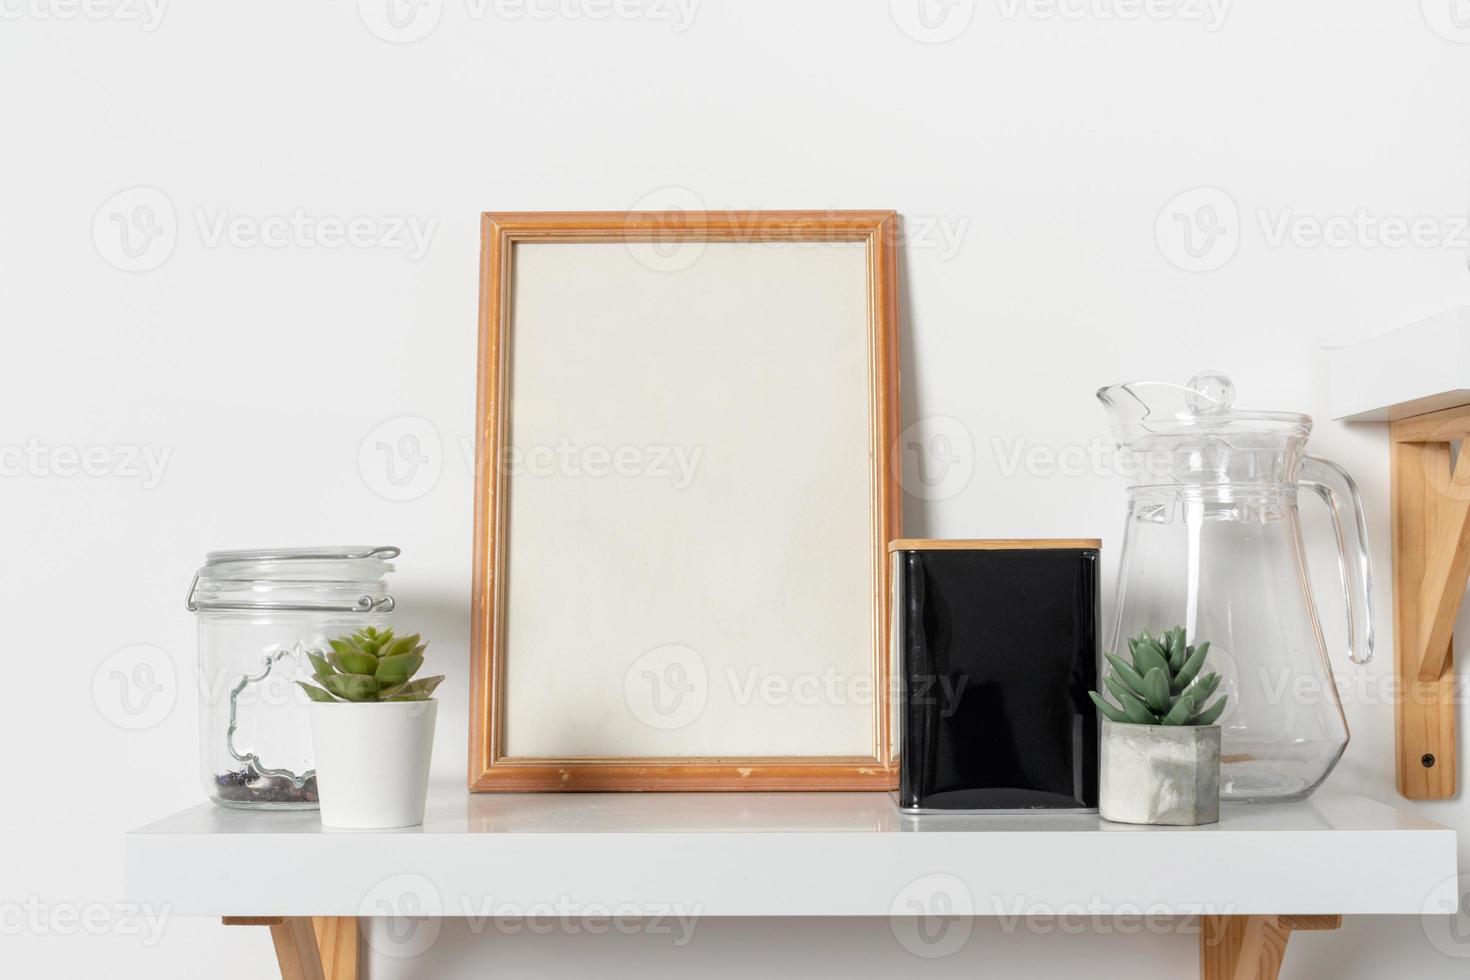 Wooden vertical frame with kitchen decor over white wall photo